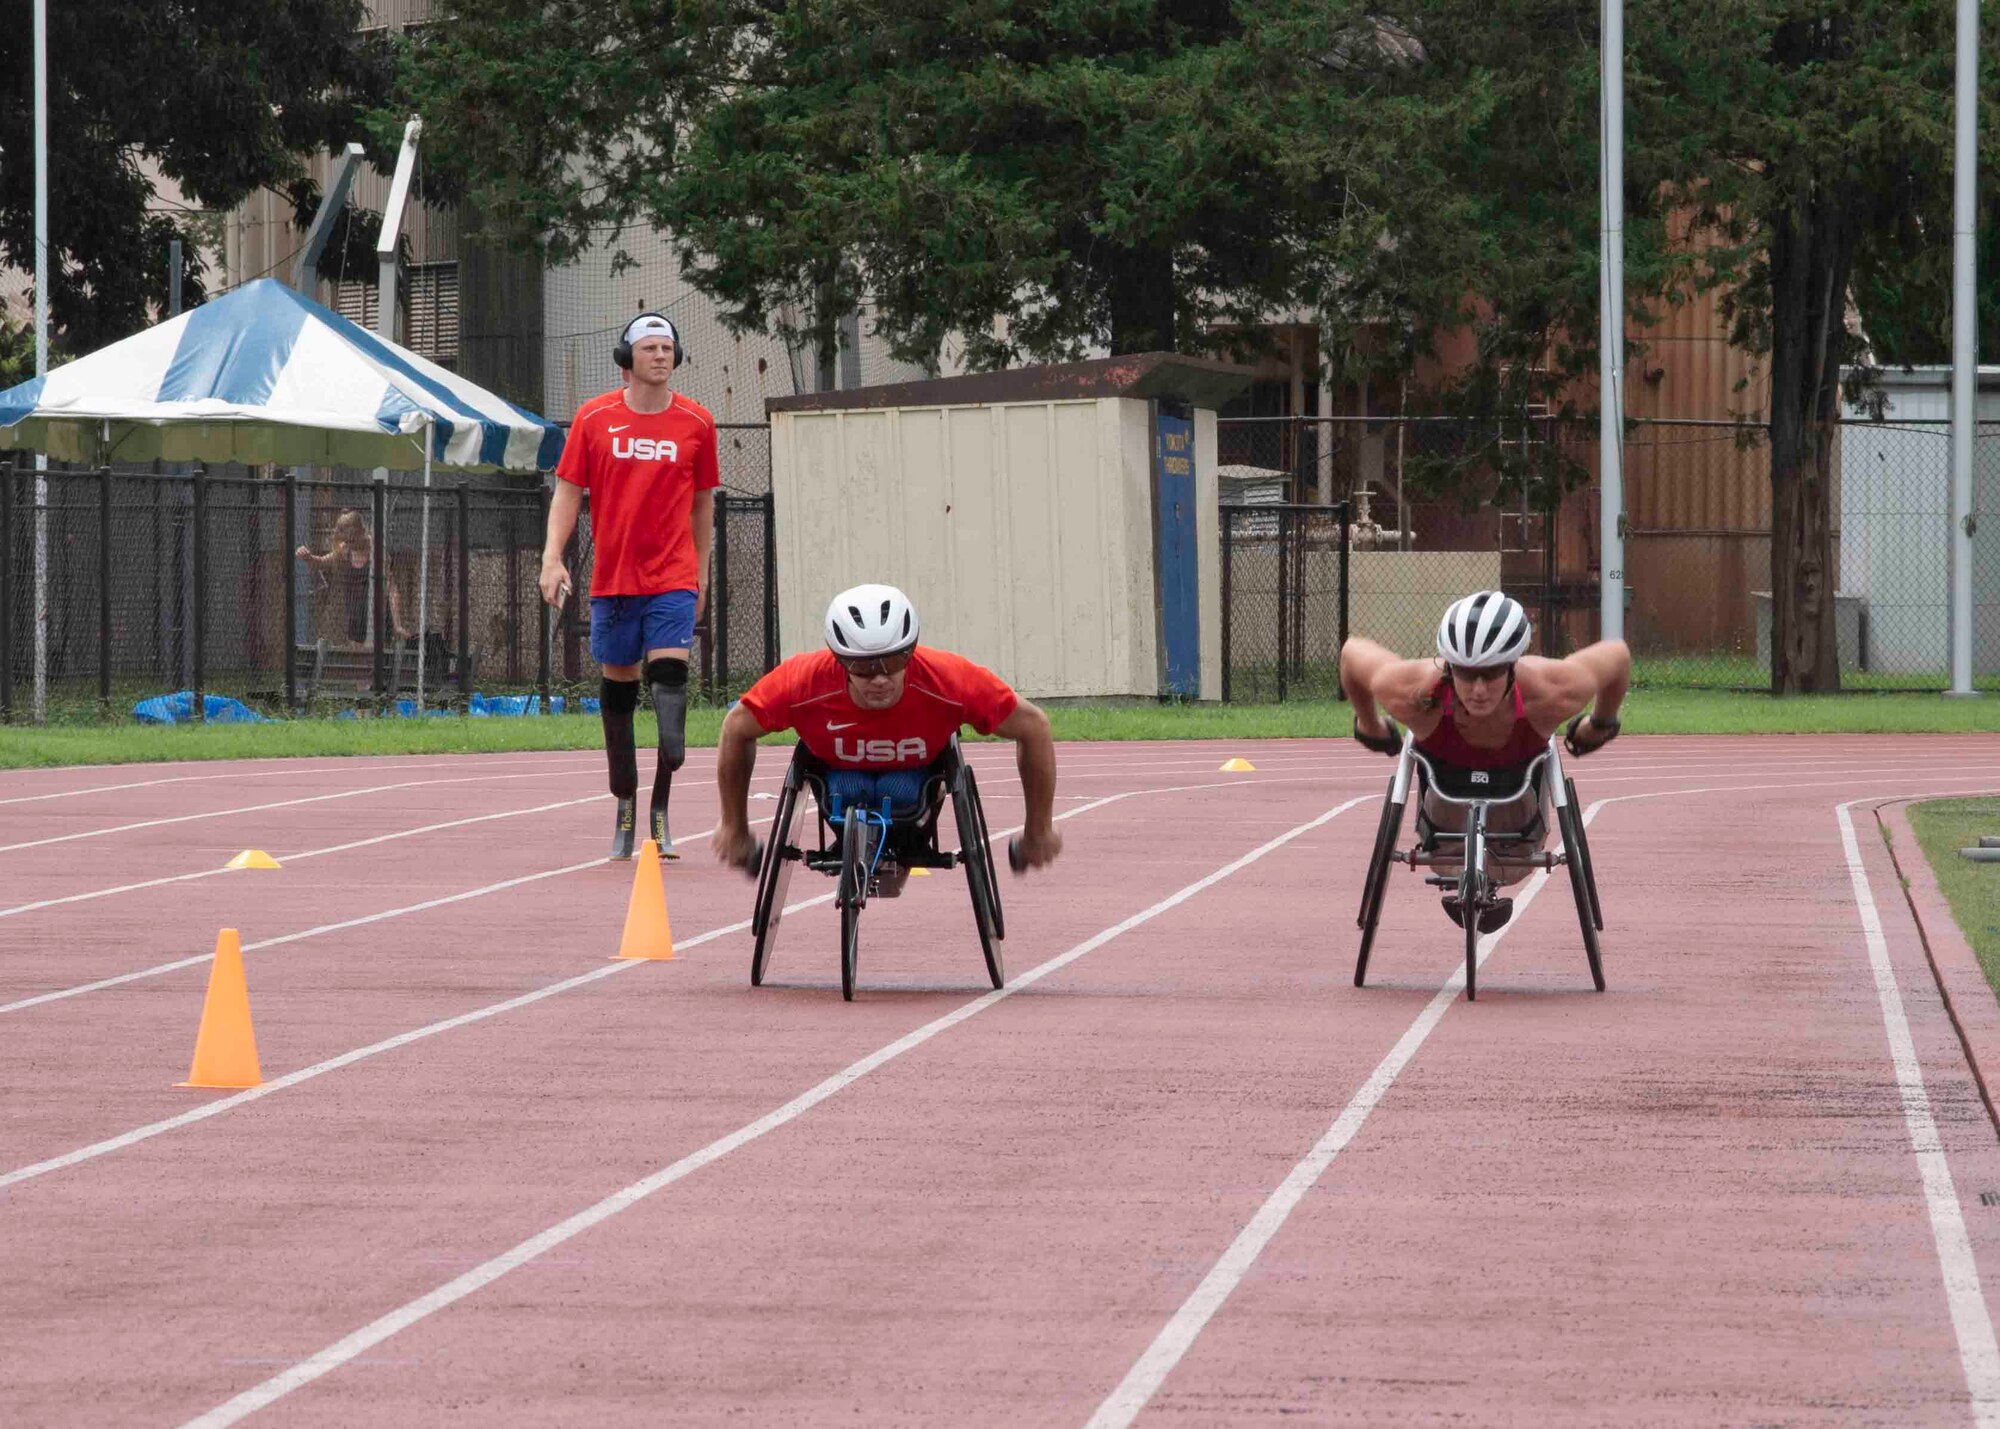 U.S. Para track and field team members practice at Yokota Air Base, Japan, Aug. 18, 2021, before competing in the 2020 Summer Paralympic games in Tokyo.